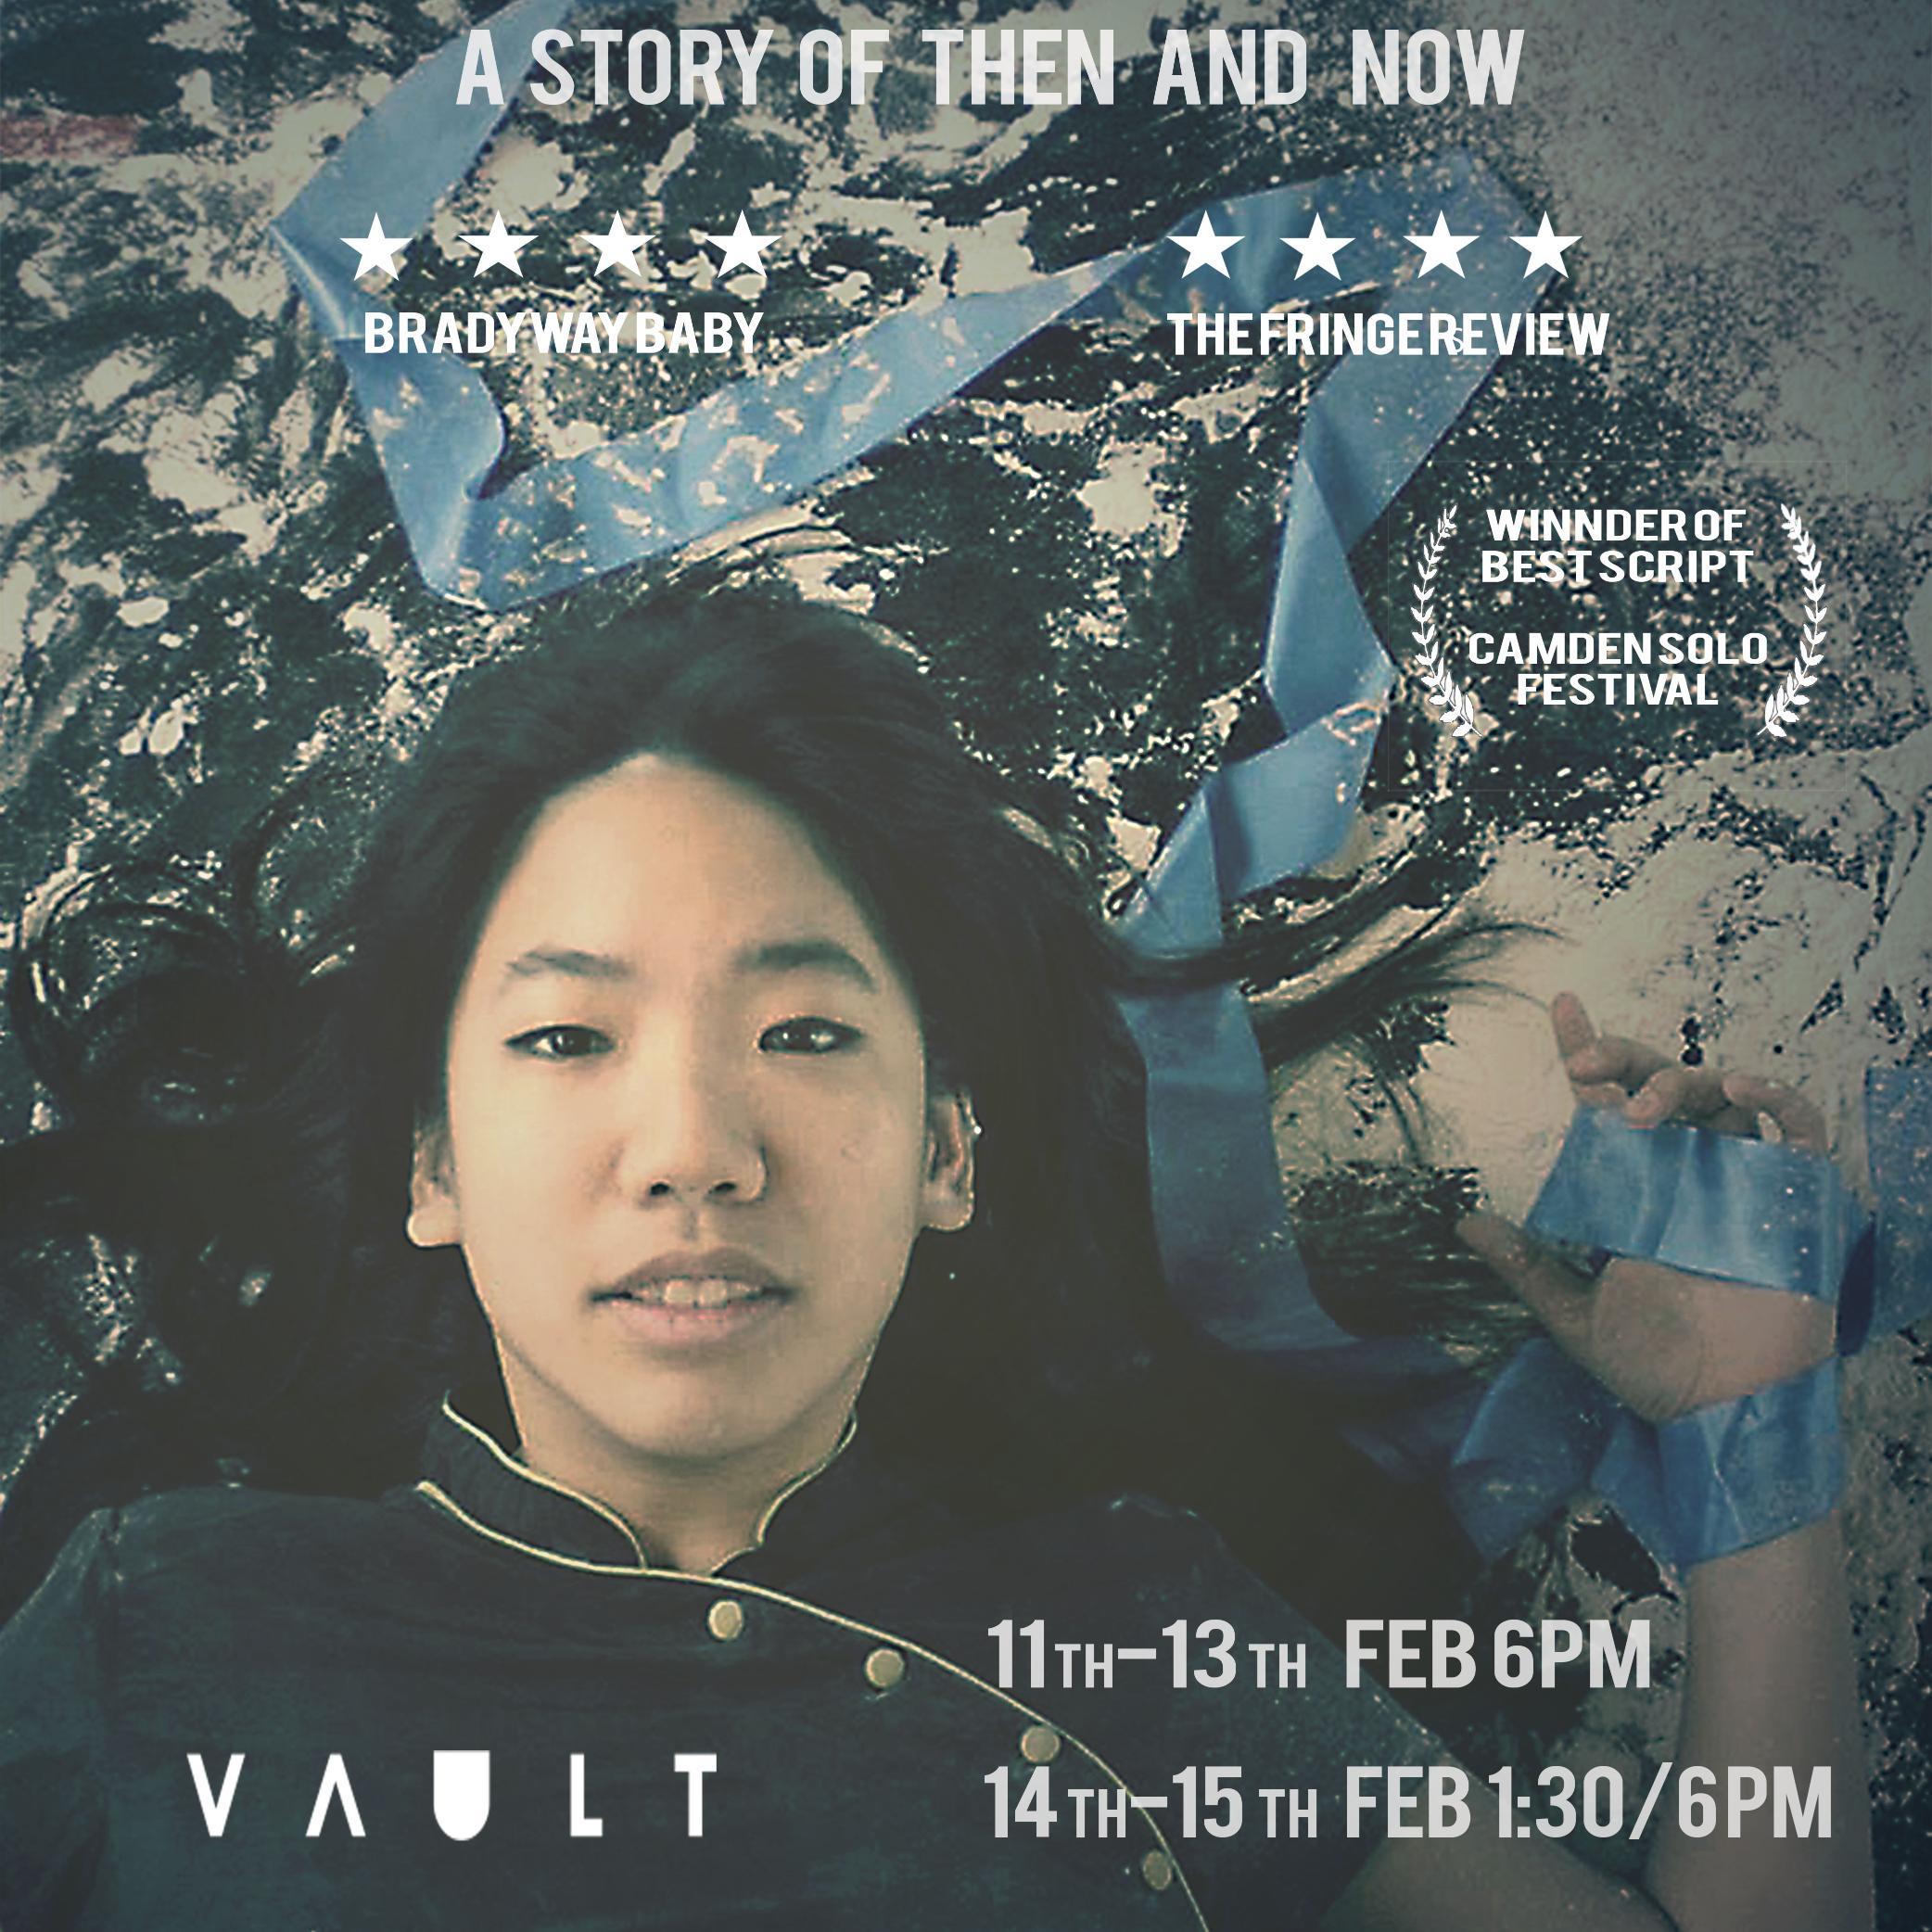 We are @heather_lai & @PelagieMay  Great Stories from the Far East.  Bringing you a visual feast at VAULT 2015. #TeaTimeStory